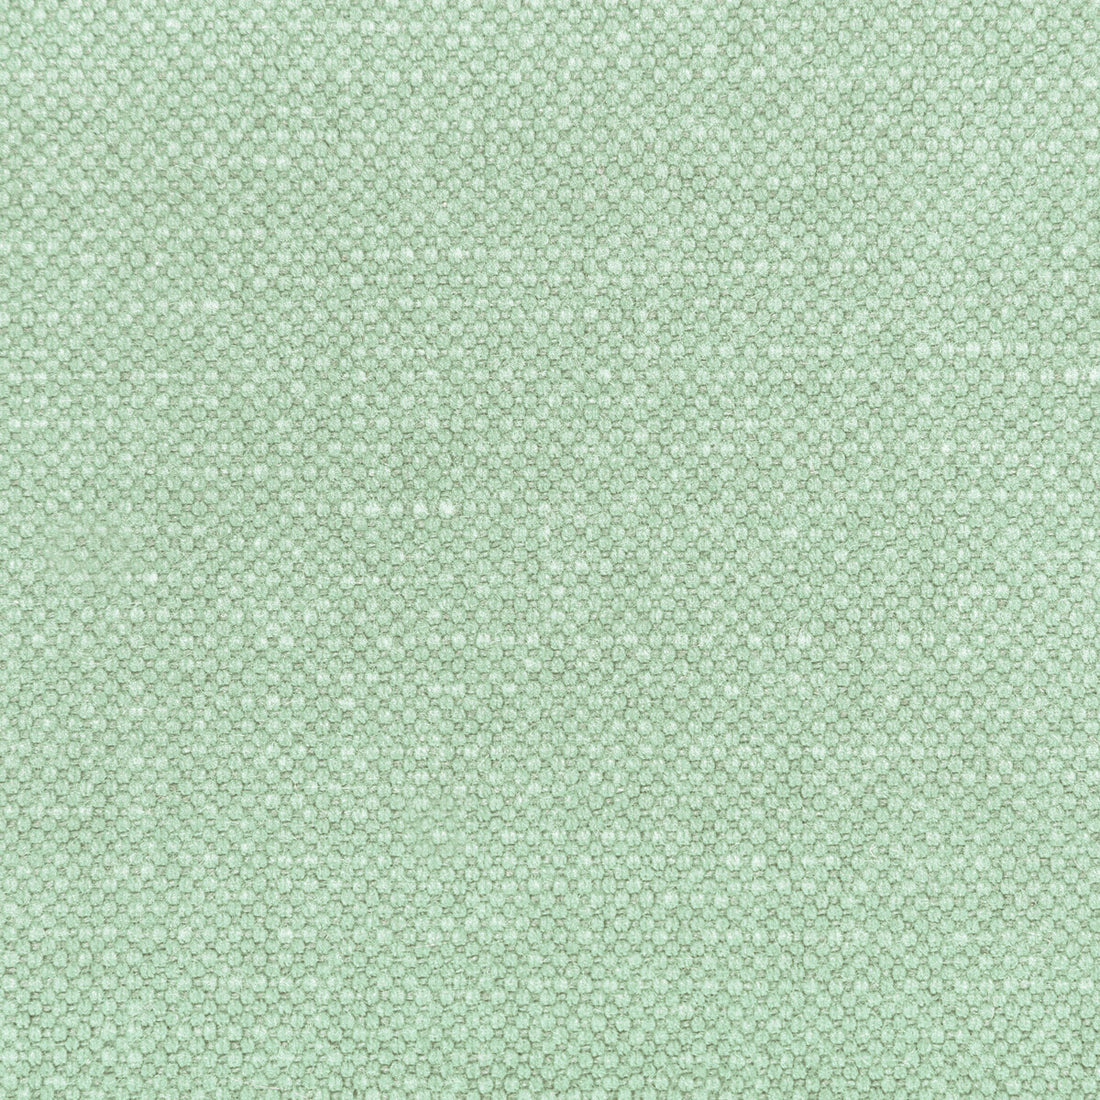 Carson fabric in mint color - pattern 36282.1523.0 - by Kravet Basics